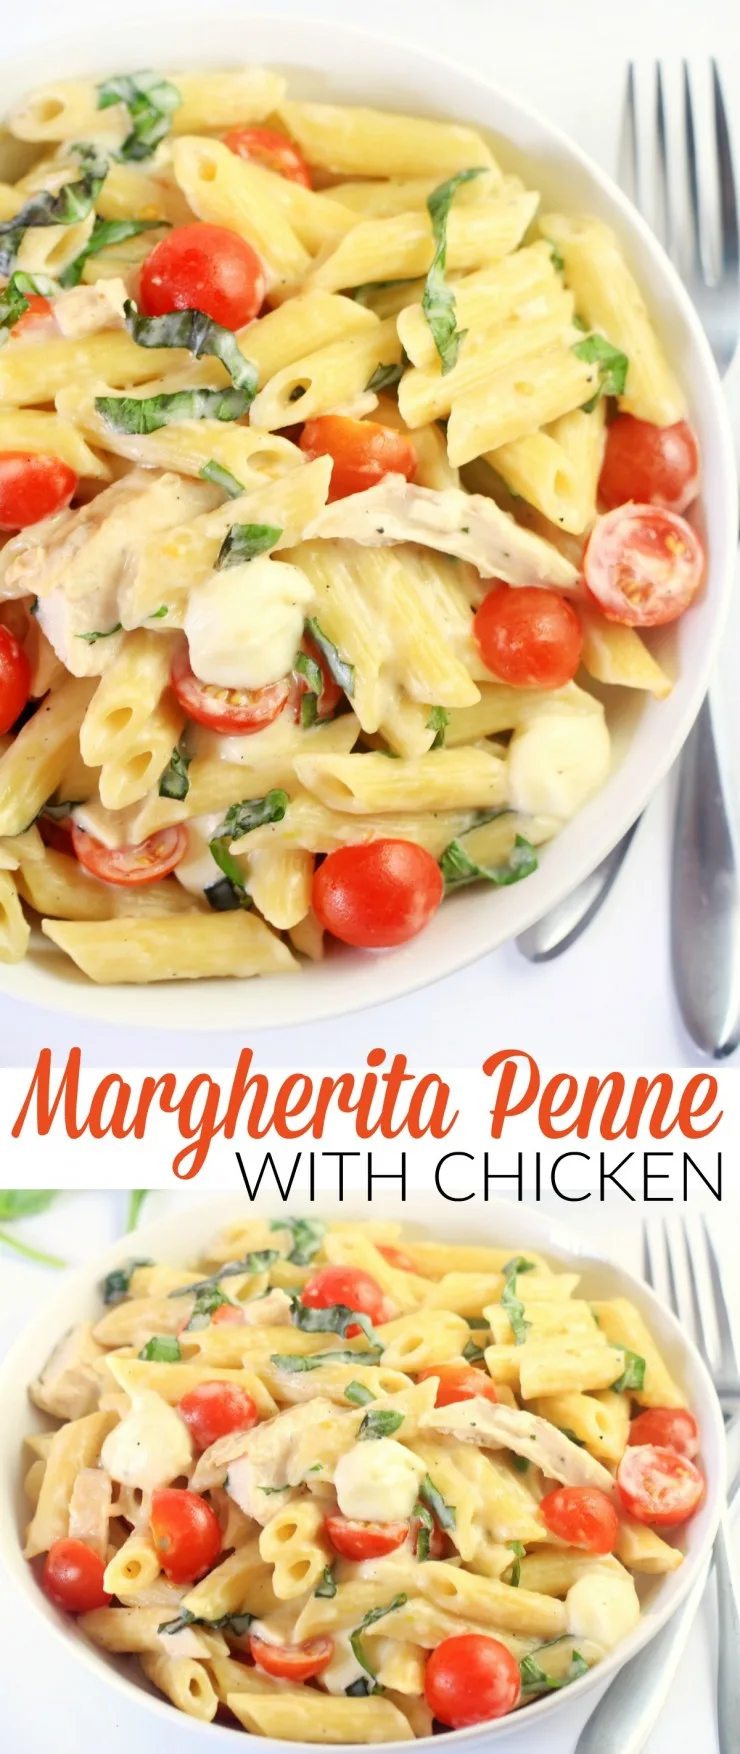 The classic pizza gets a makeover into a delicious family meal idea in this Margherita Penne with Chicken recipe. A cheesy sauce, fresh tomatoes and pasta means this dinner idea will soon be among your favourite dinner recipes!